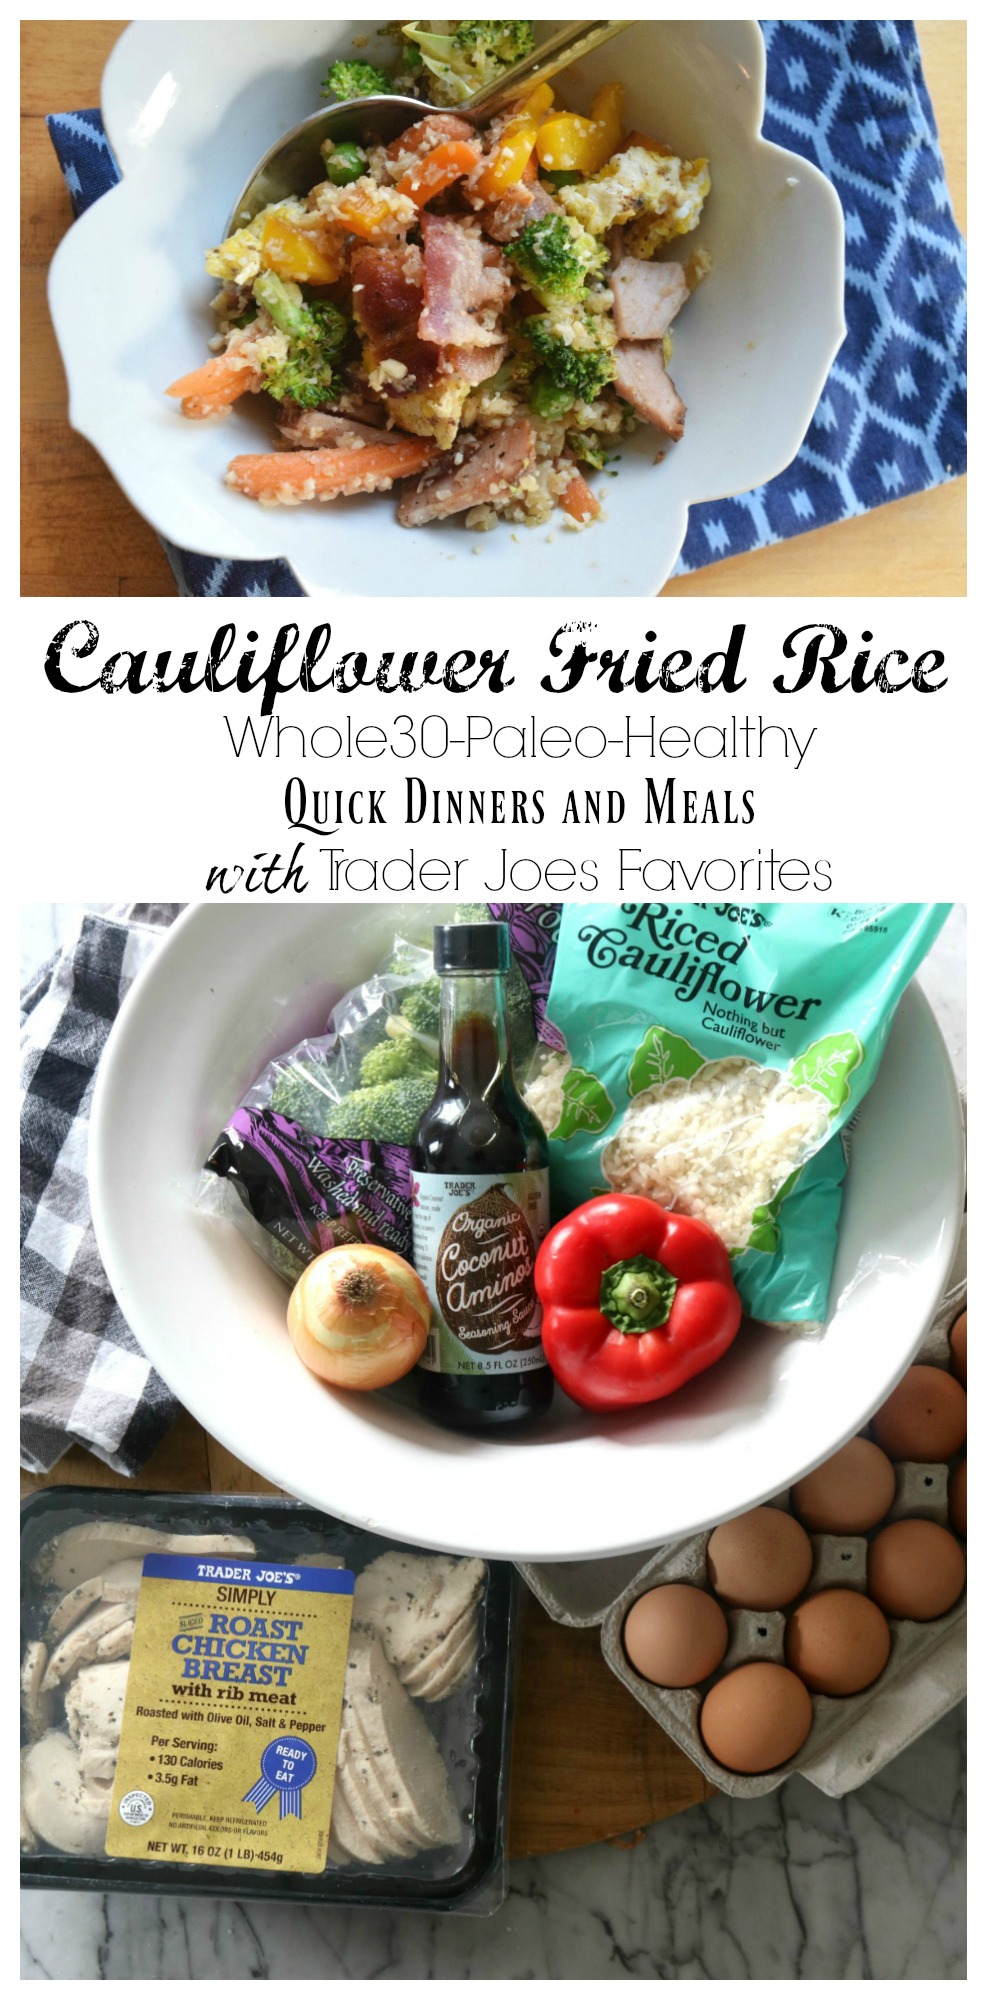 Quick Healthy Dinners and My Favorite Things from Trader Joe's